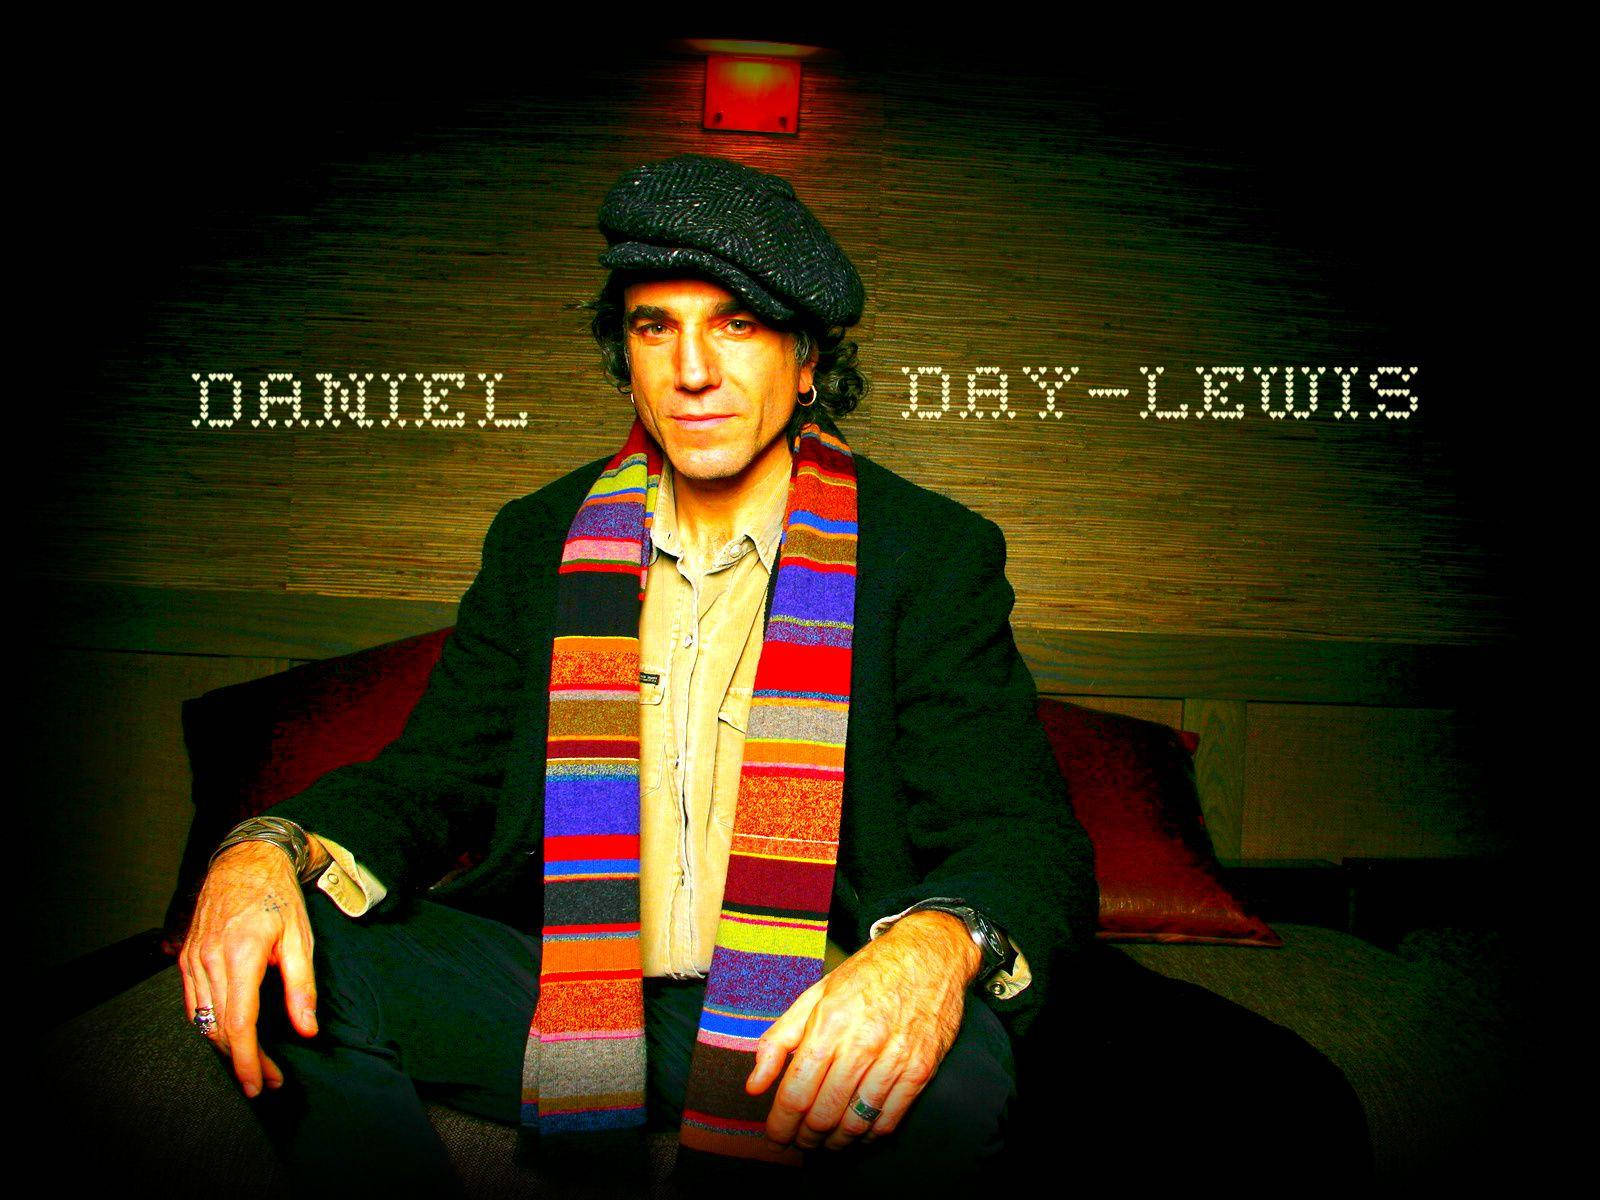 Daniel Day-Lewis Smiling with a Scarf Wallpaper